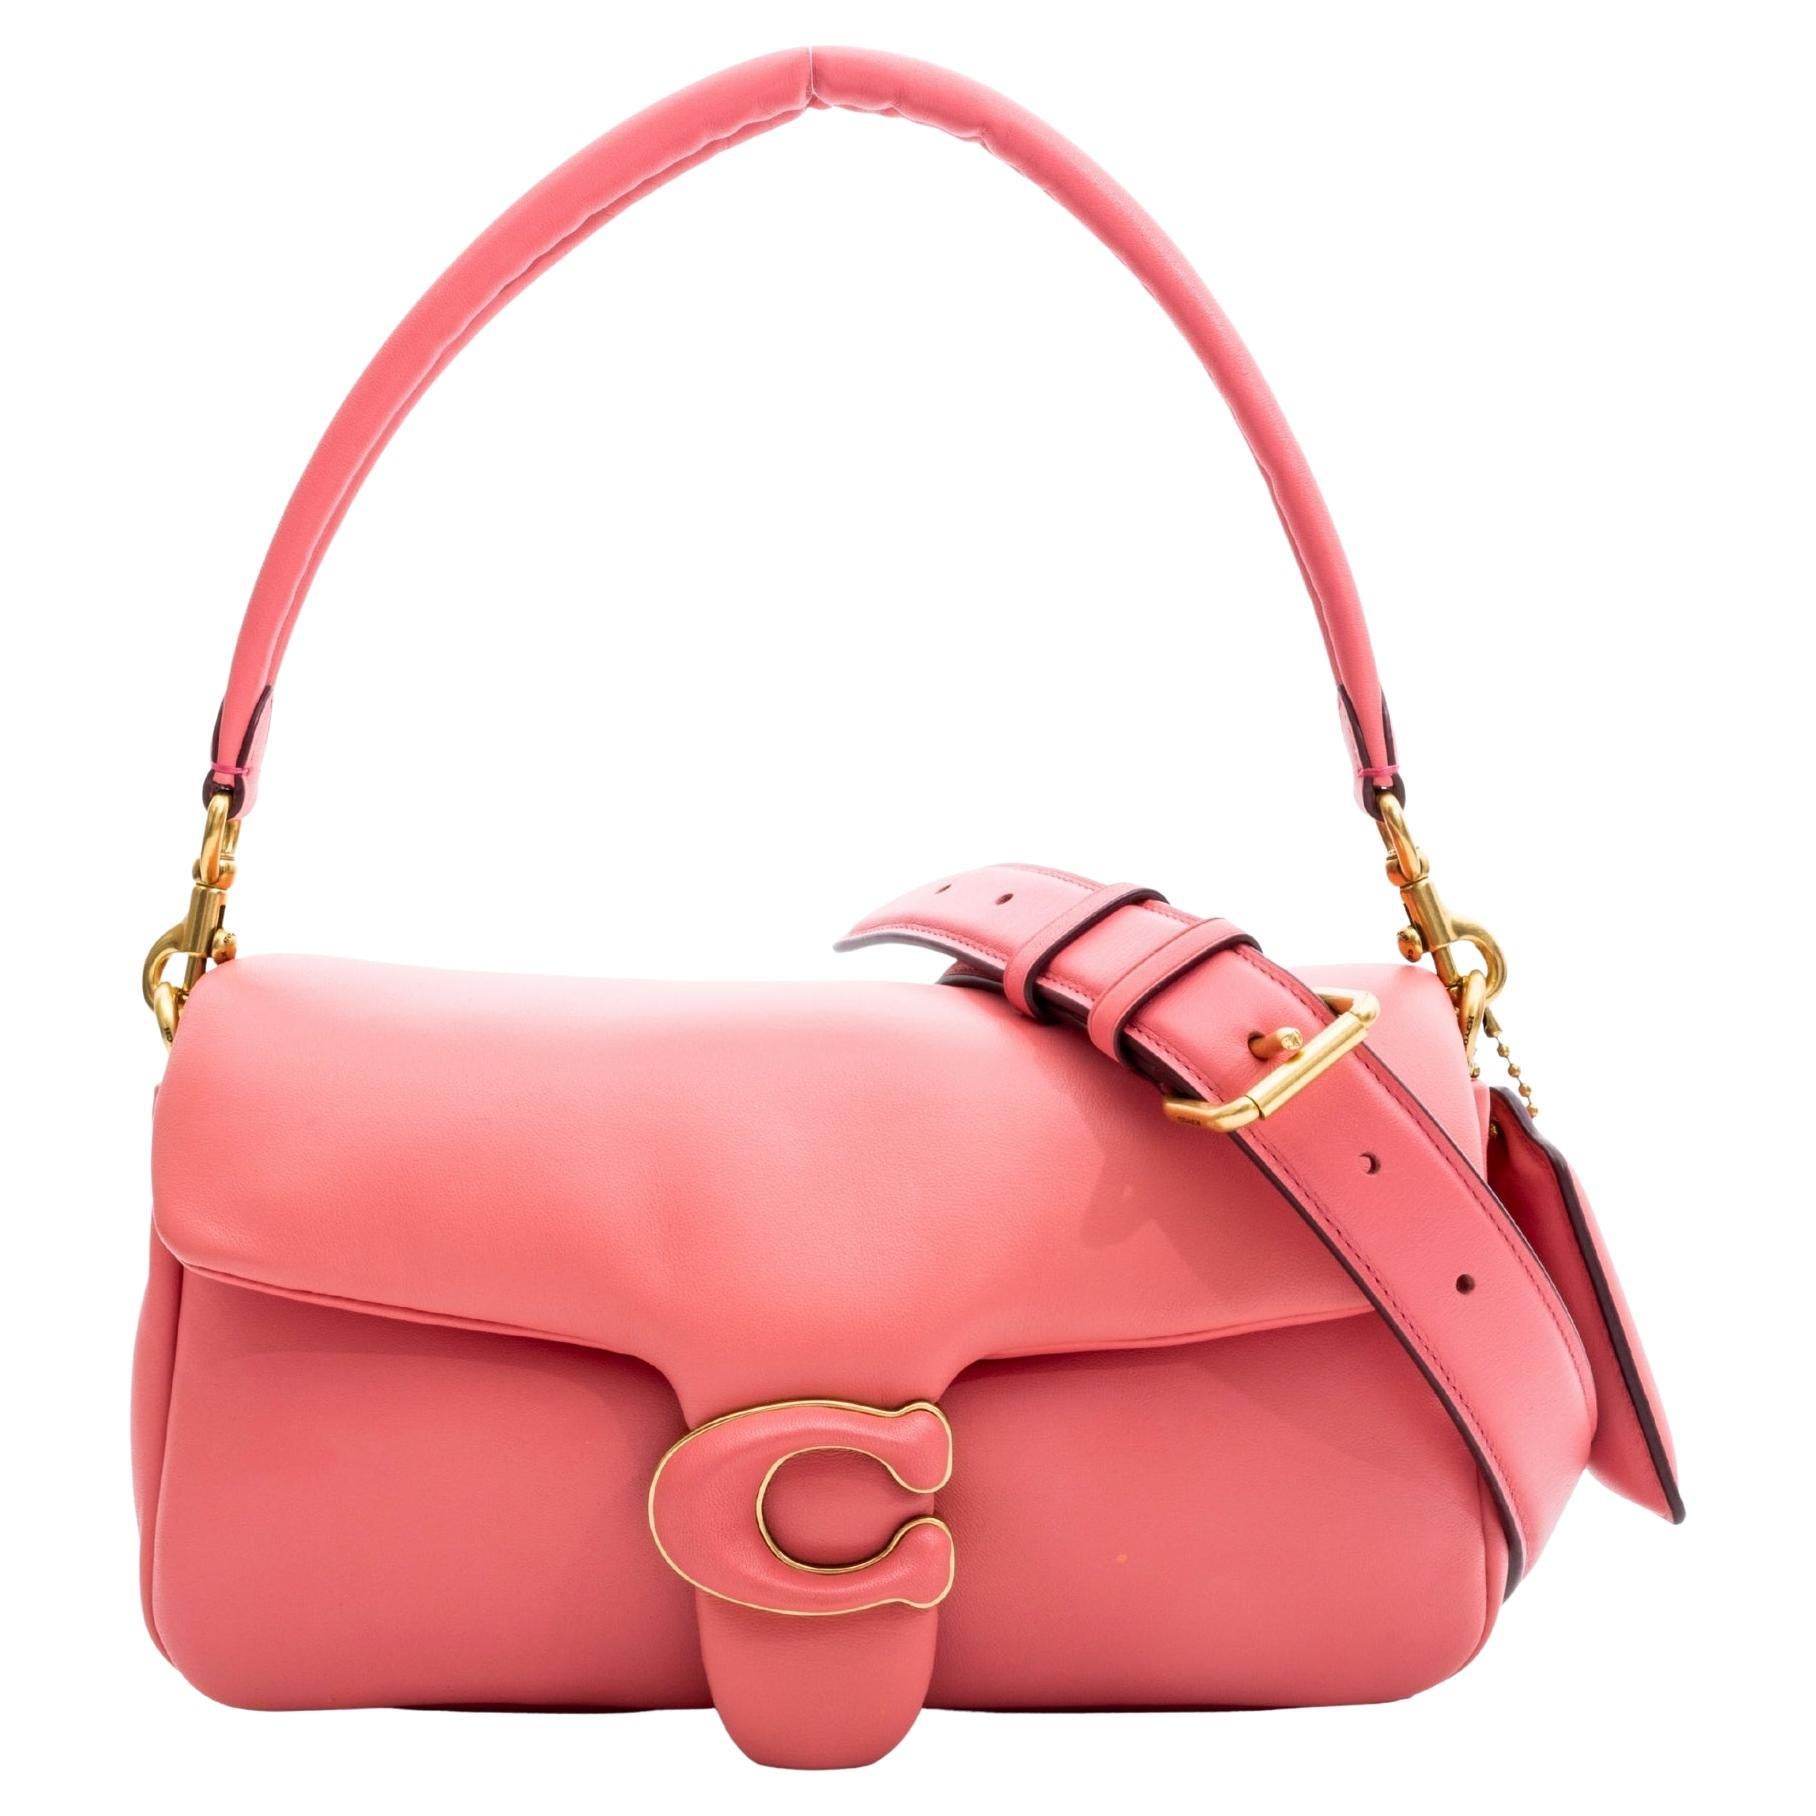 Coach Pink Leather Pillow Tabby Shoulder Bag